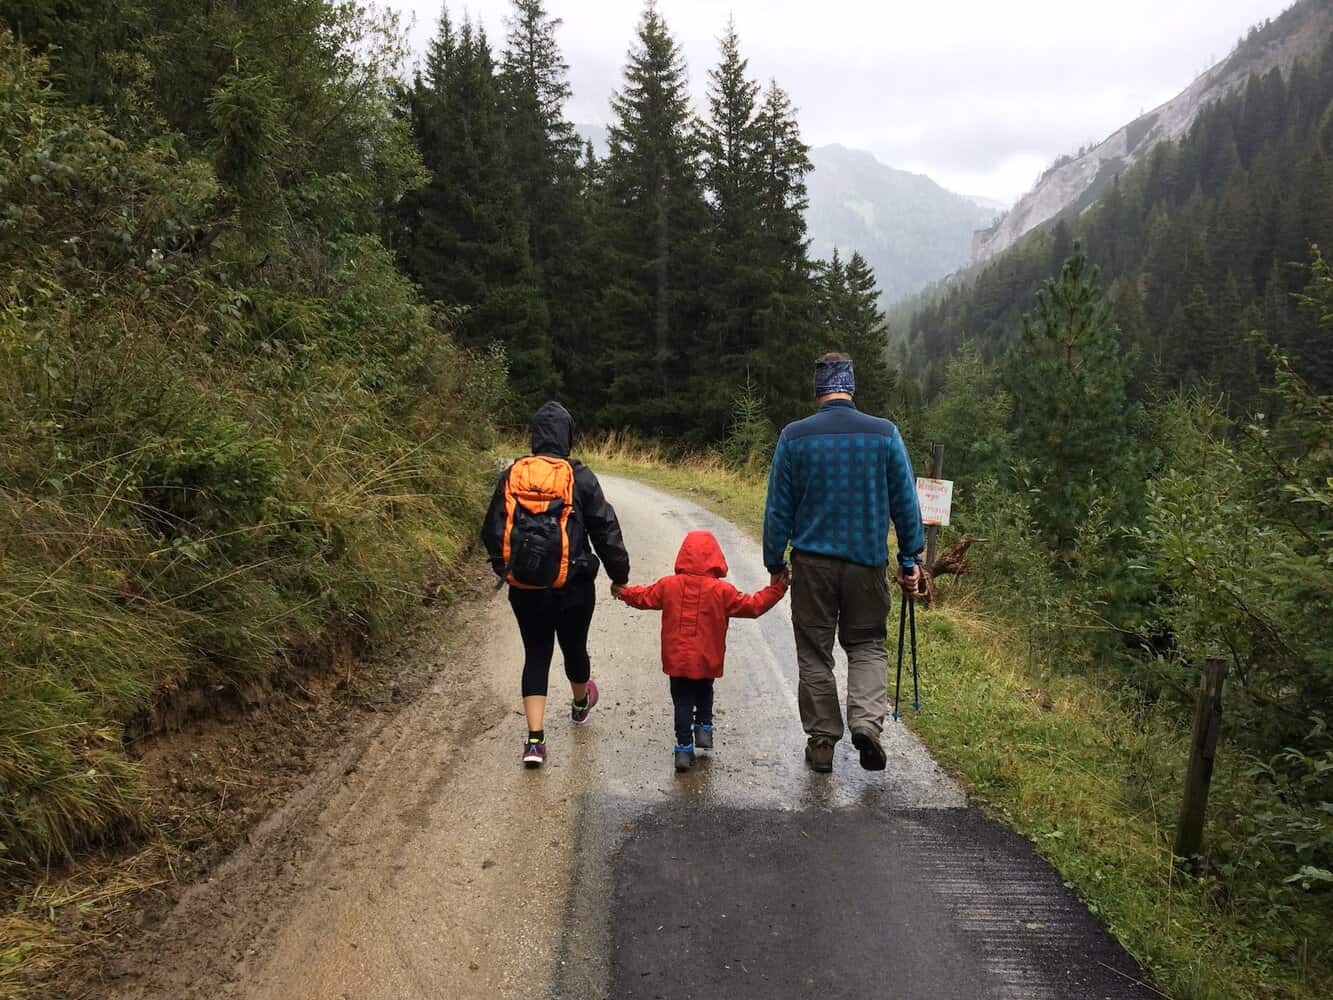 Family travel 101: 8 tips for an unforgettable experience with your loved ones